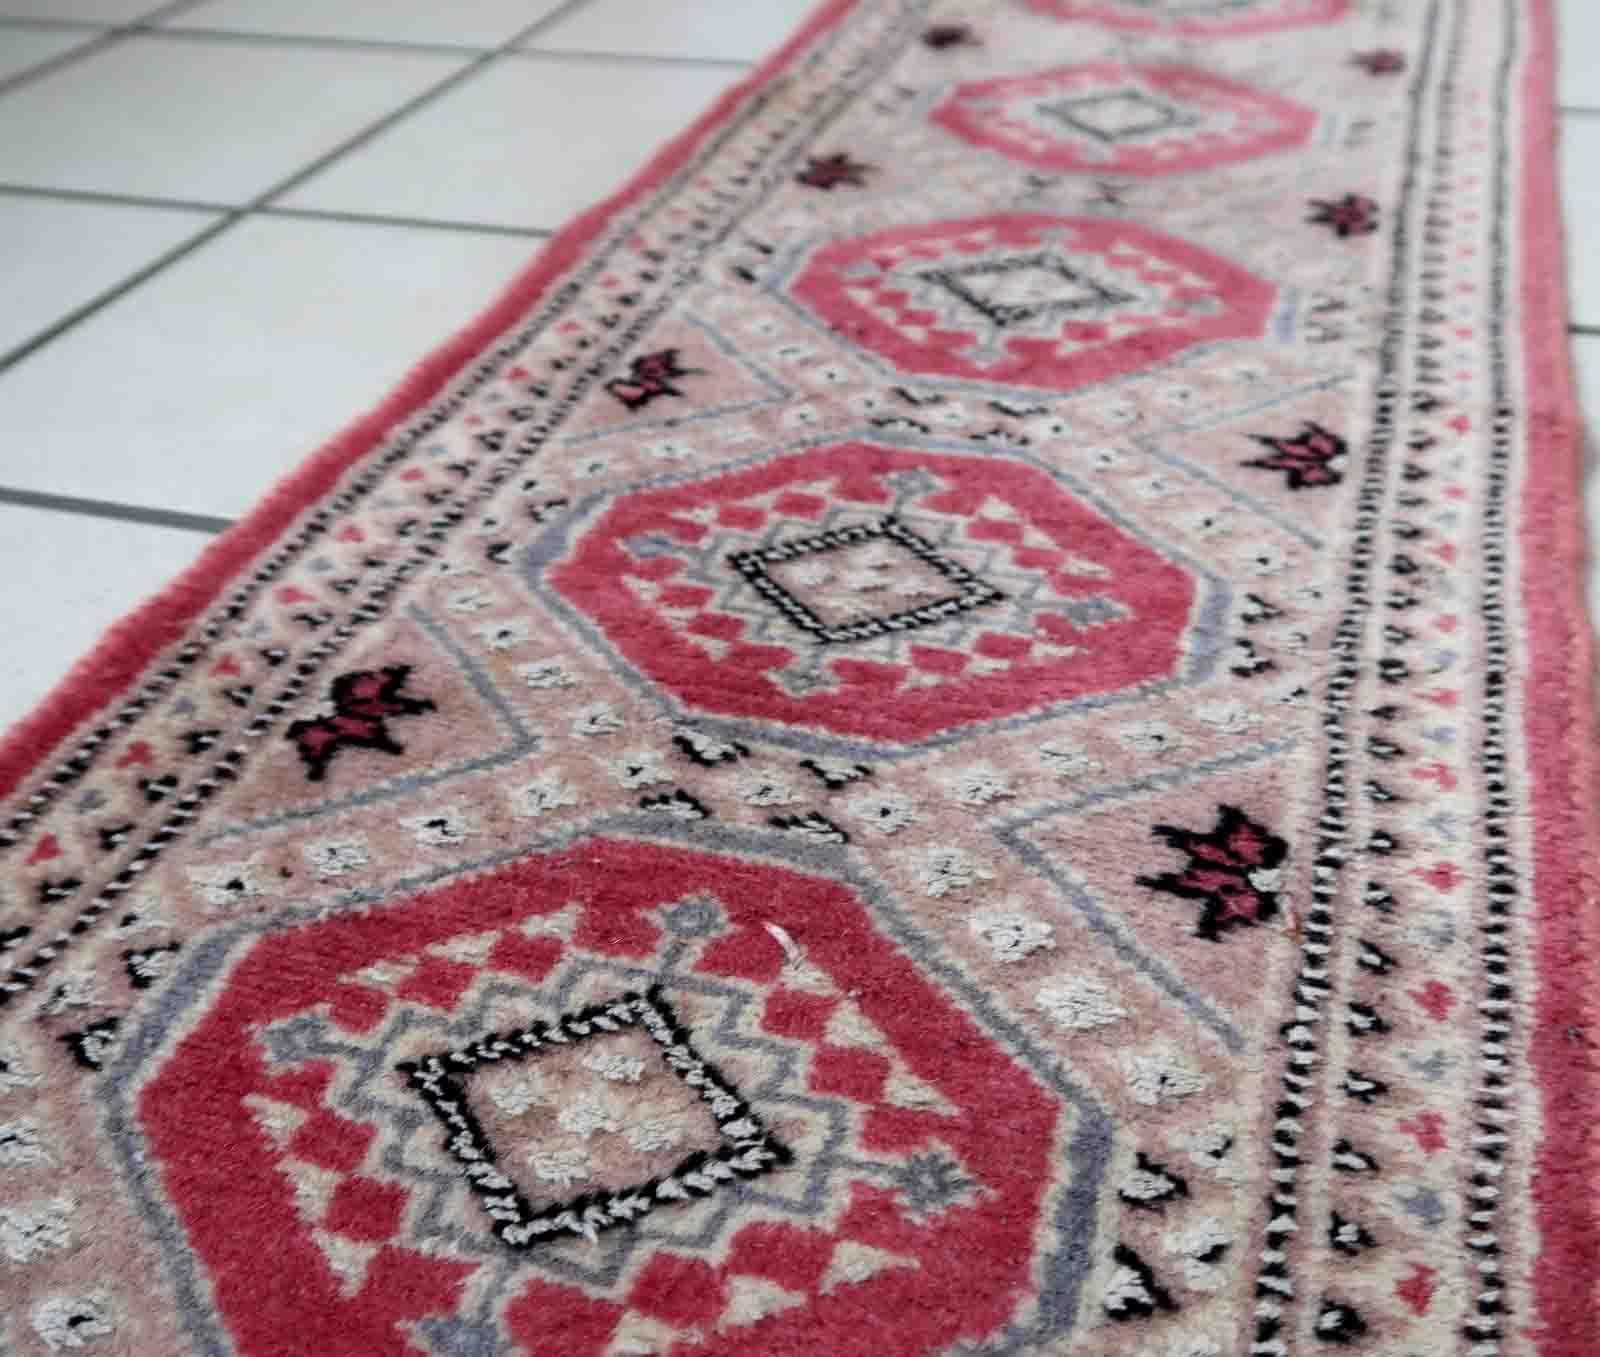 Vintage Uzbek Bukhara mat in light shades. The rug is from the end of 20th century made in wool with silk highlights. The rug is in original good condition.

-condition: original good,

-circa: 1970s,

-size: 1' x 3.1' (32cm x 97cm),
​
-material: